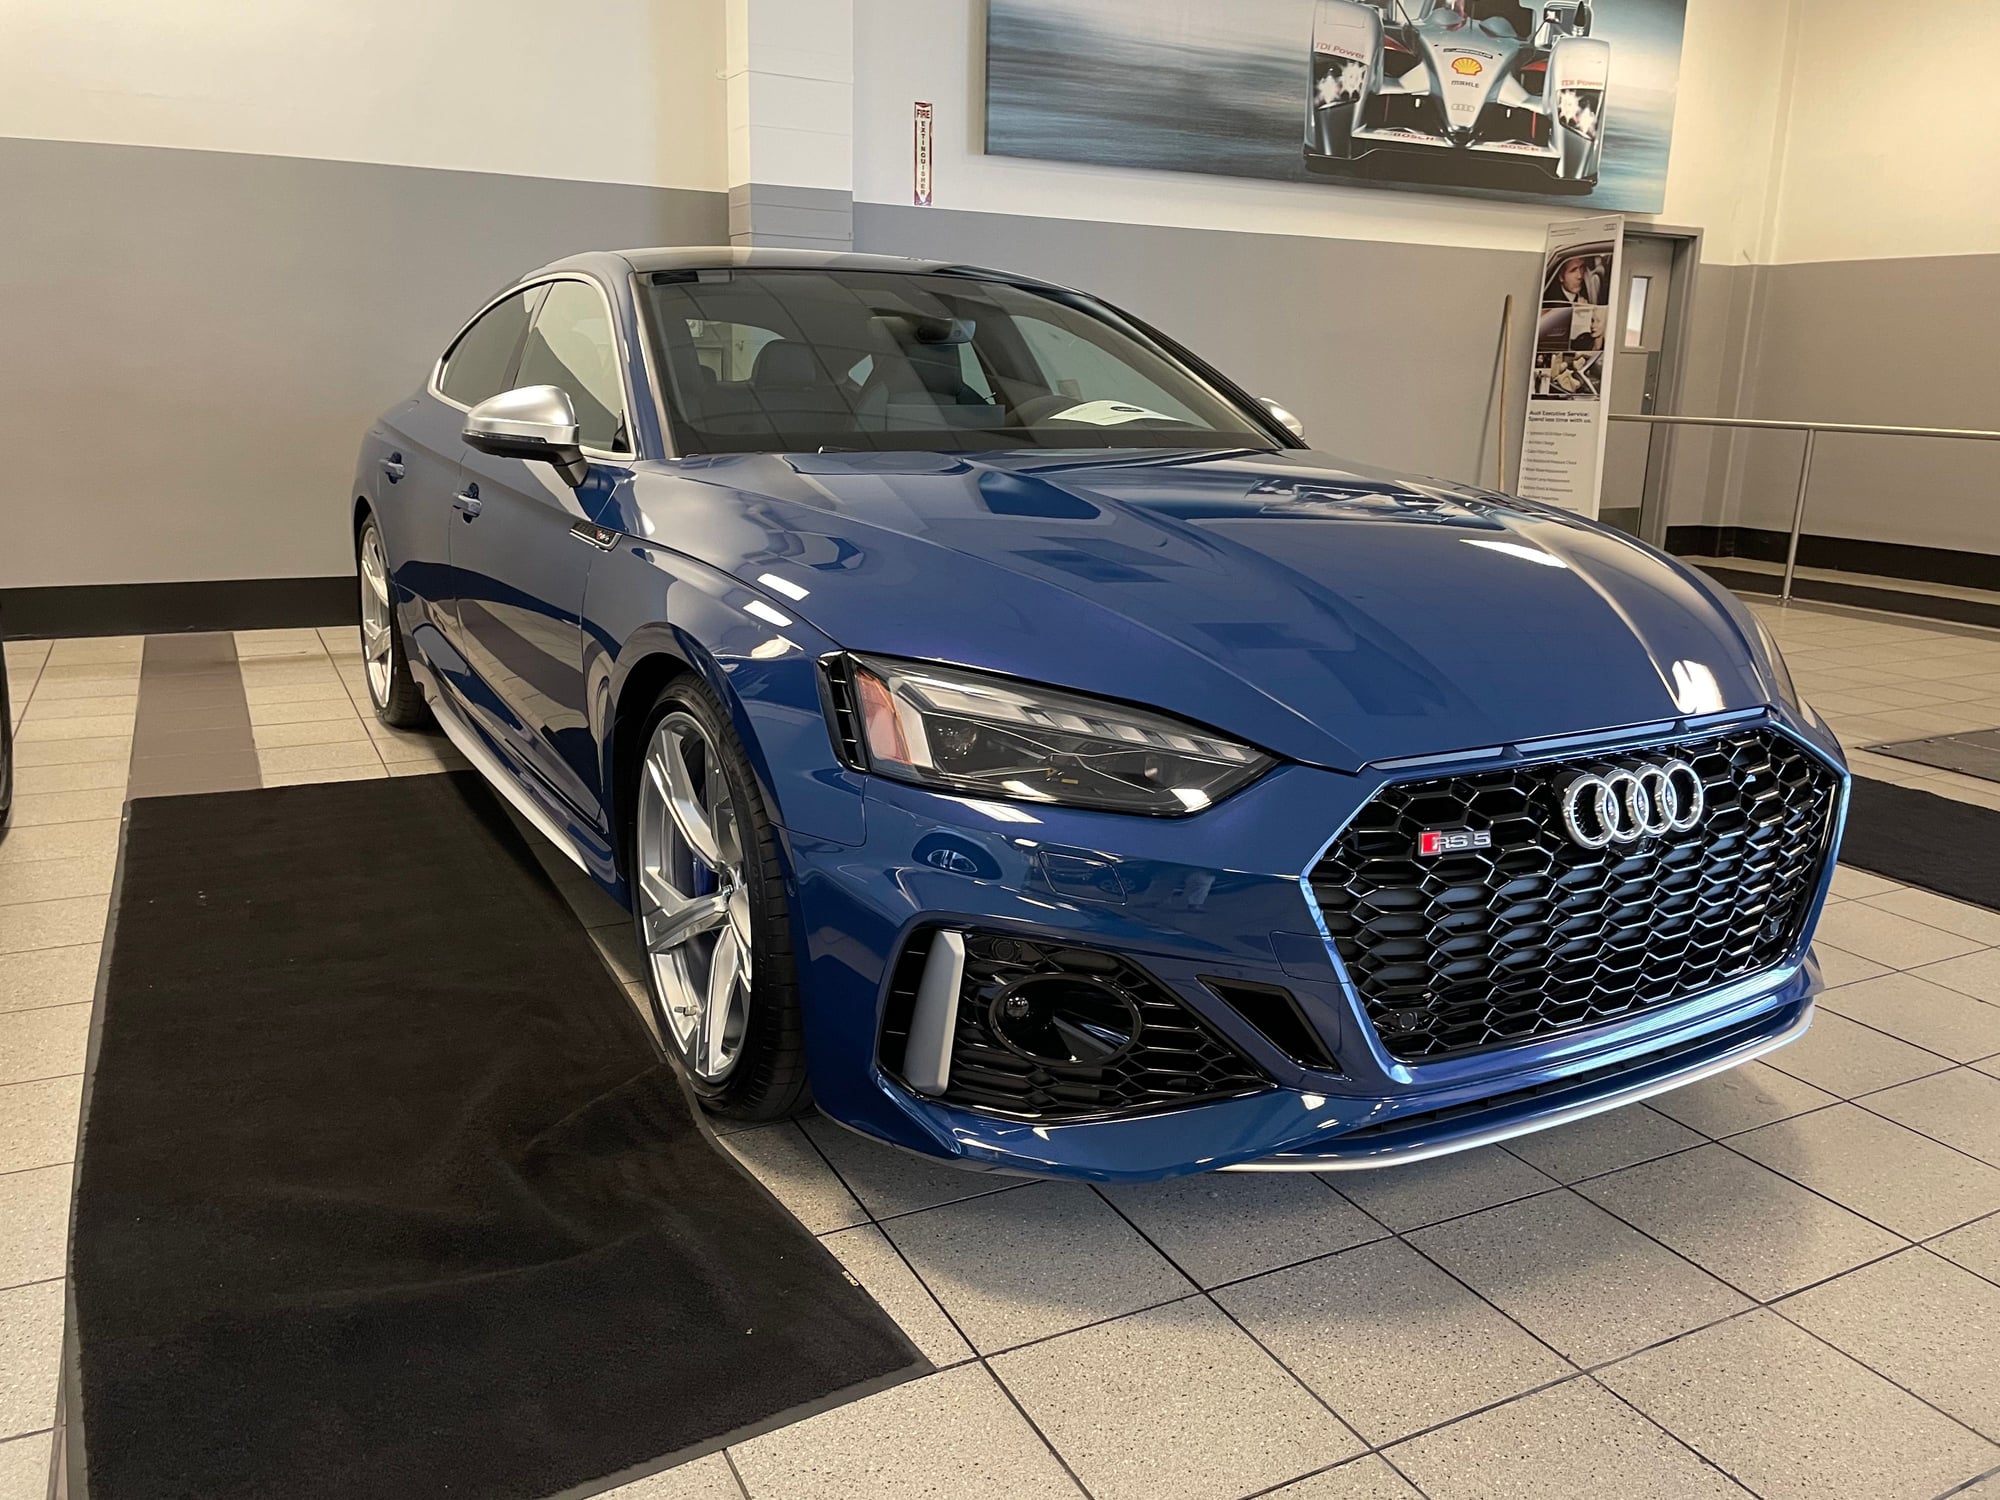 RS5 only Picture Posts - Page 78 - AudiWorld Forums